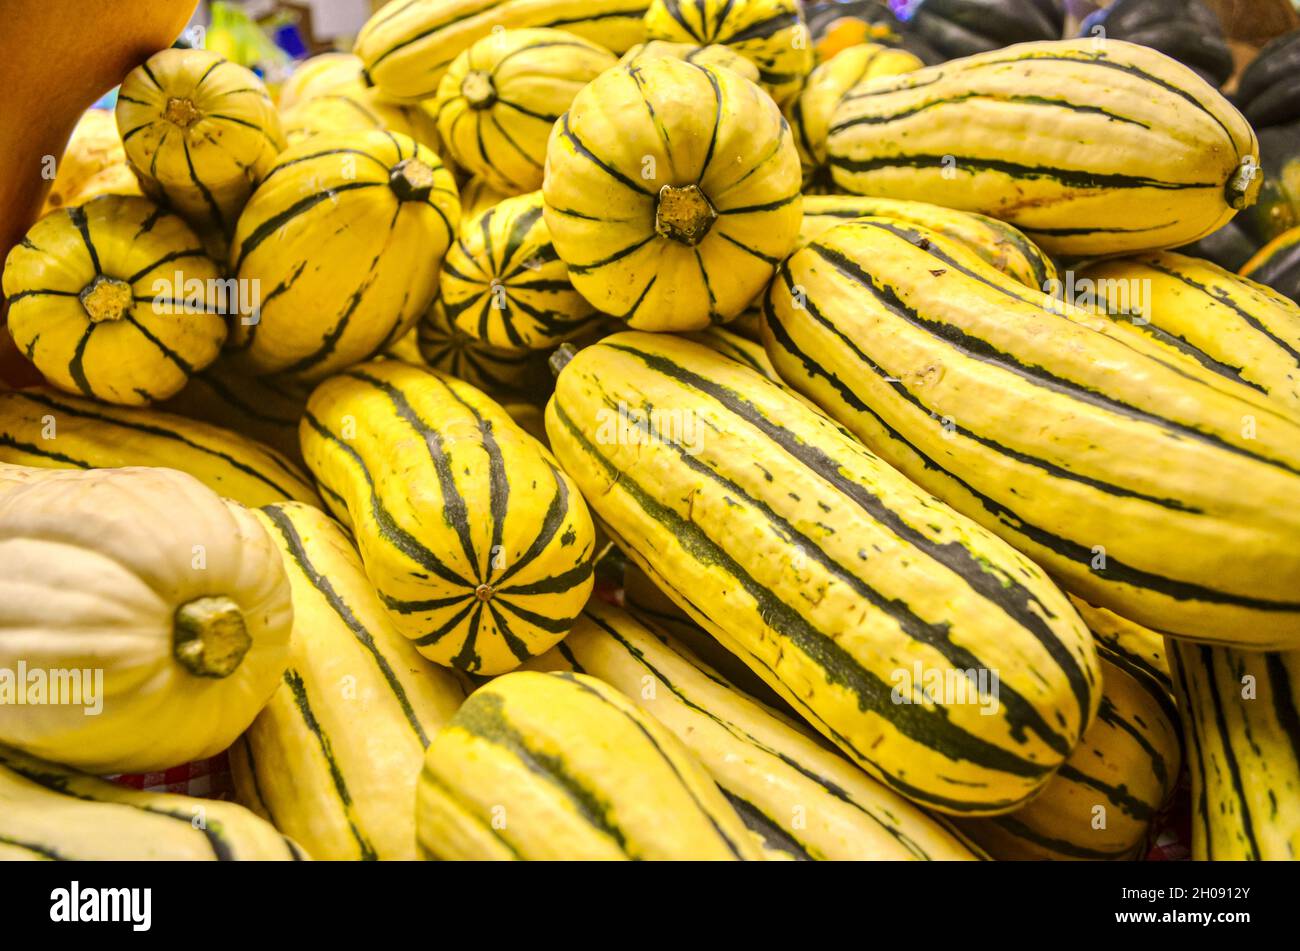 A display of Delicate squash at a local farm stand.  This squash is a cultivar of Cucurbita pepo. Is also known as peanut squash and Bohemia squash. Stock Photo